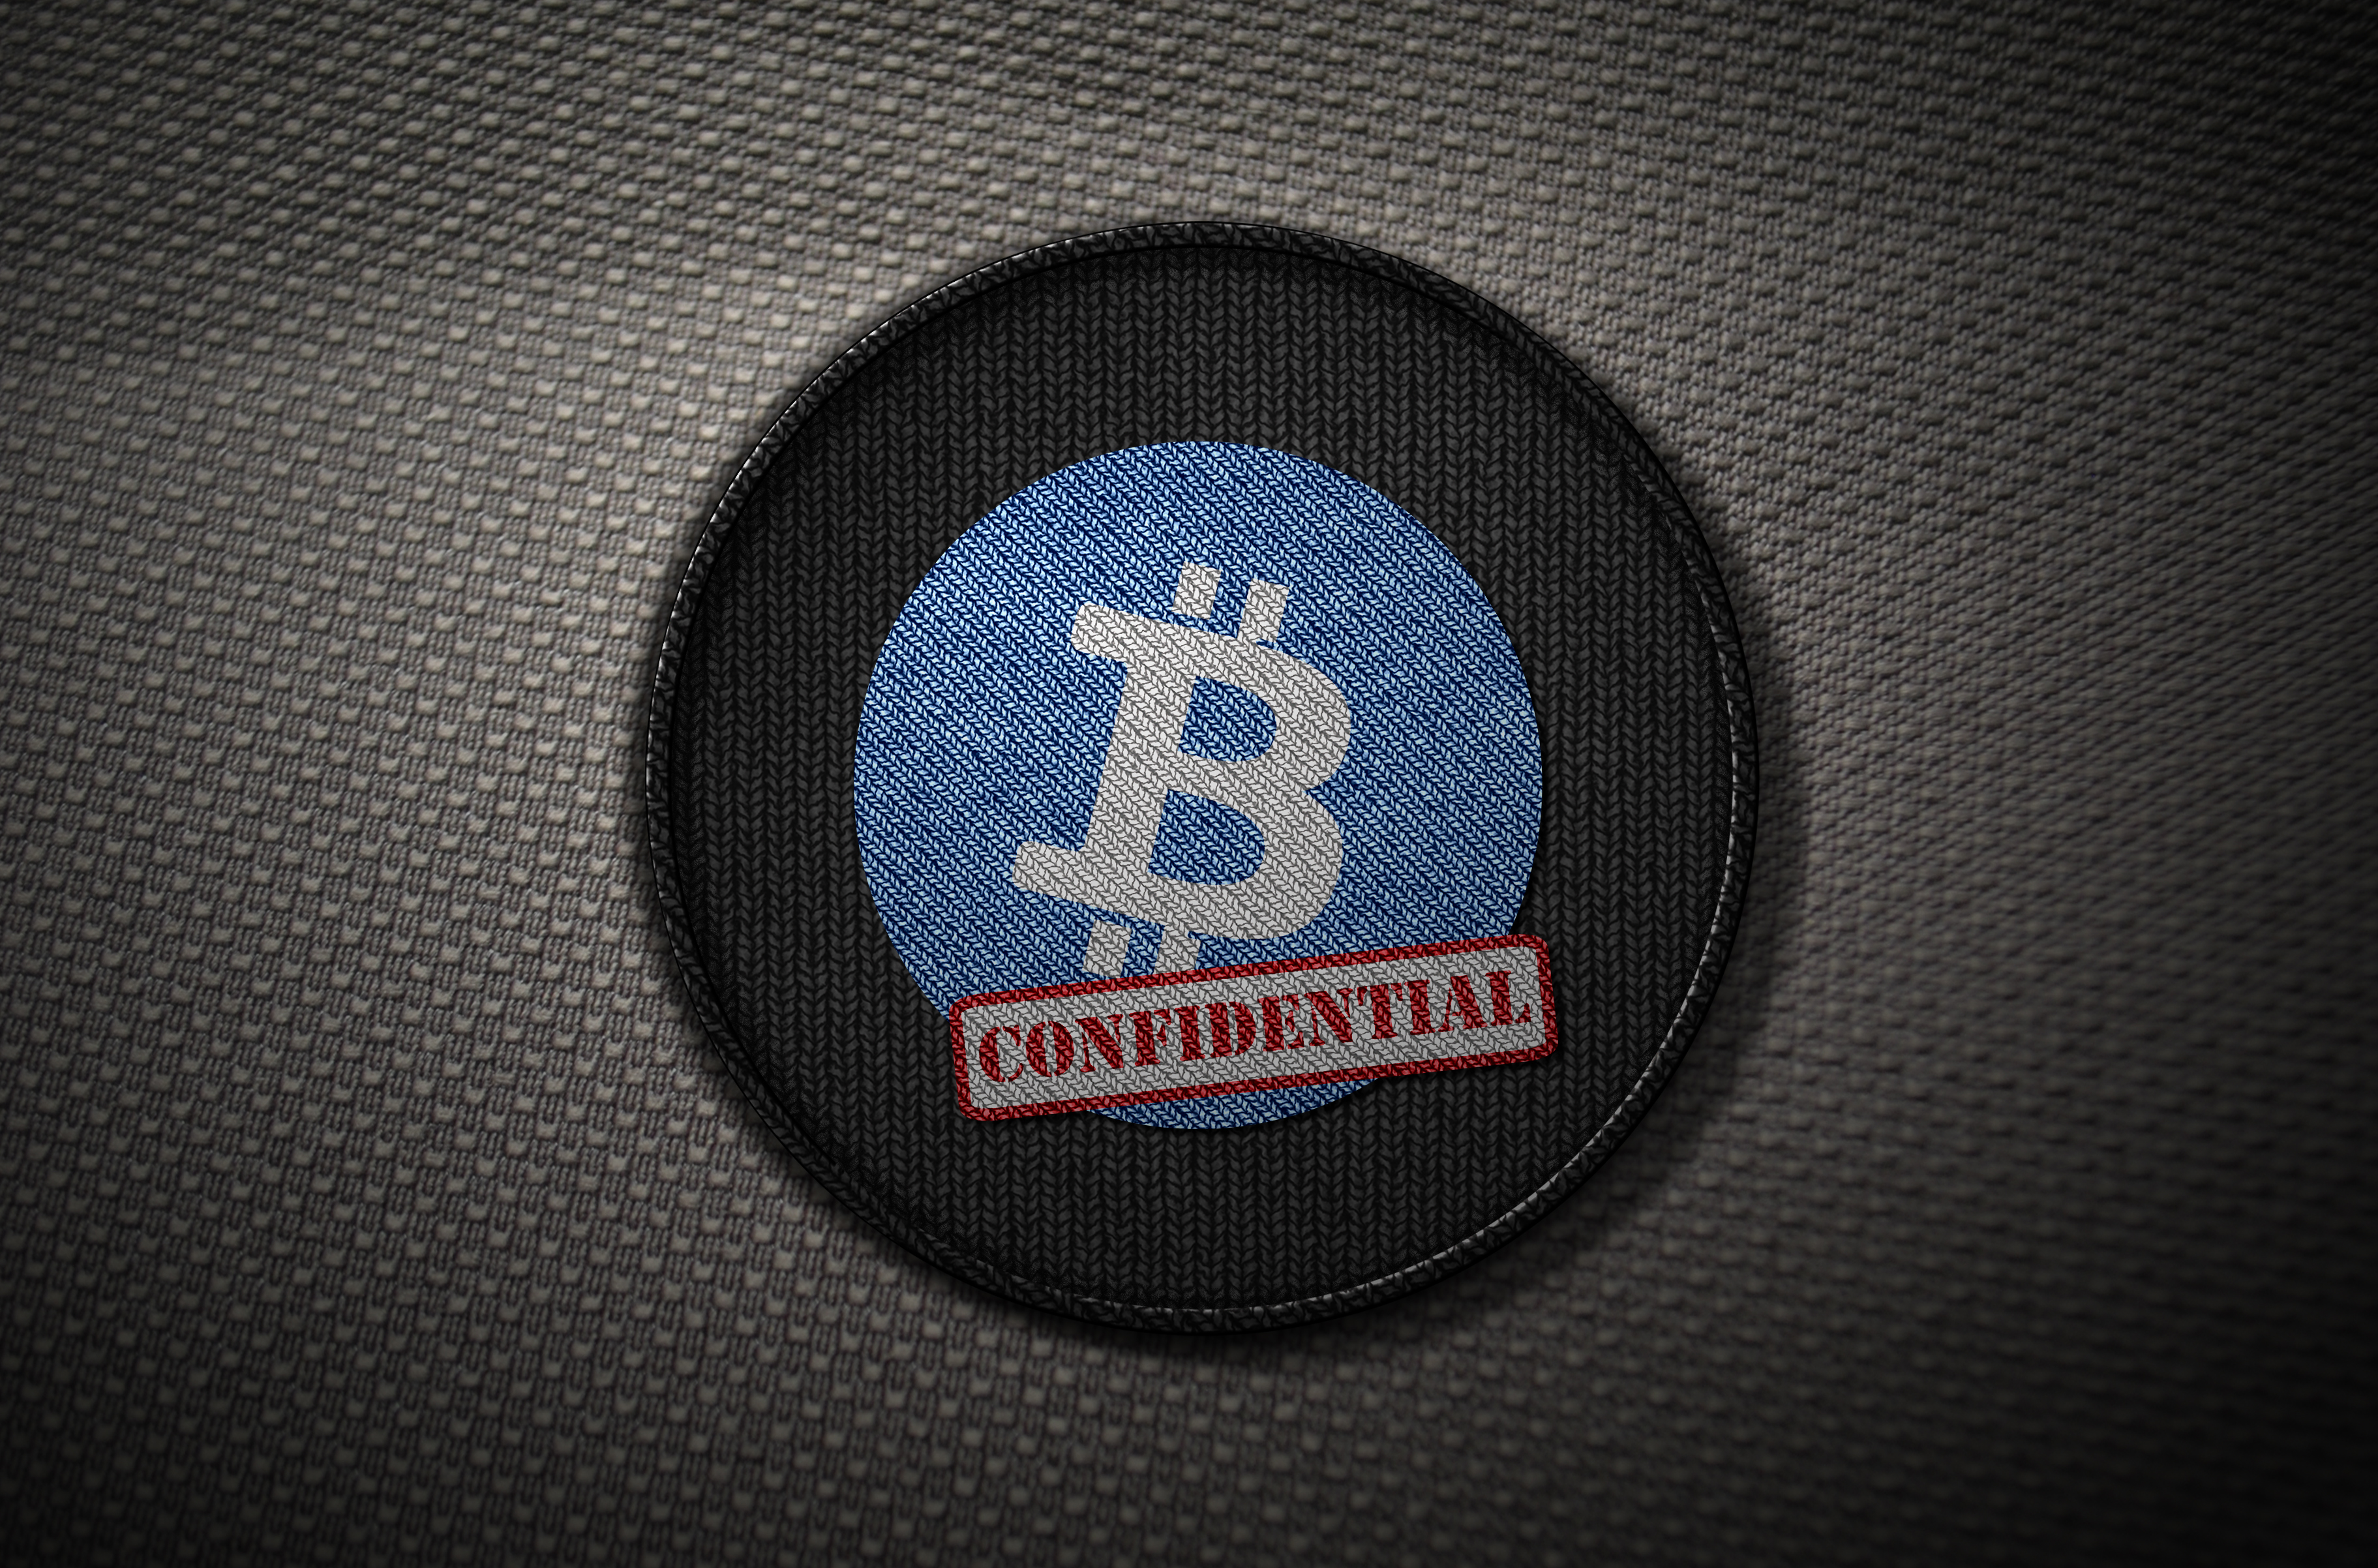 Airdrop Coming Soon For Smartcash Holders 10 1 Bitcoin Confidential - 